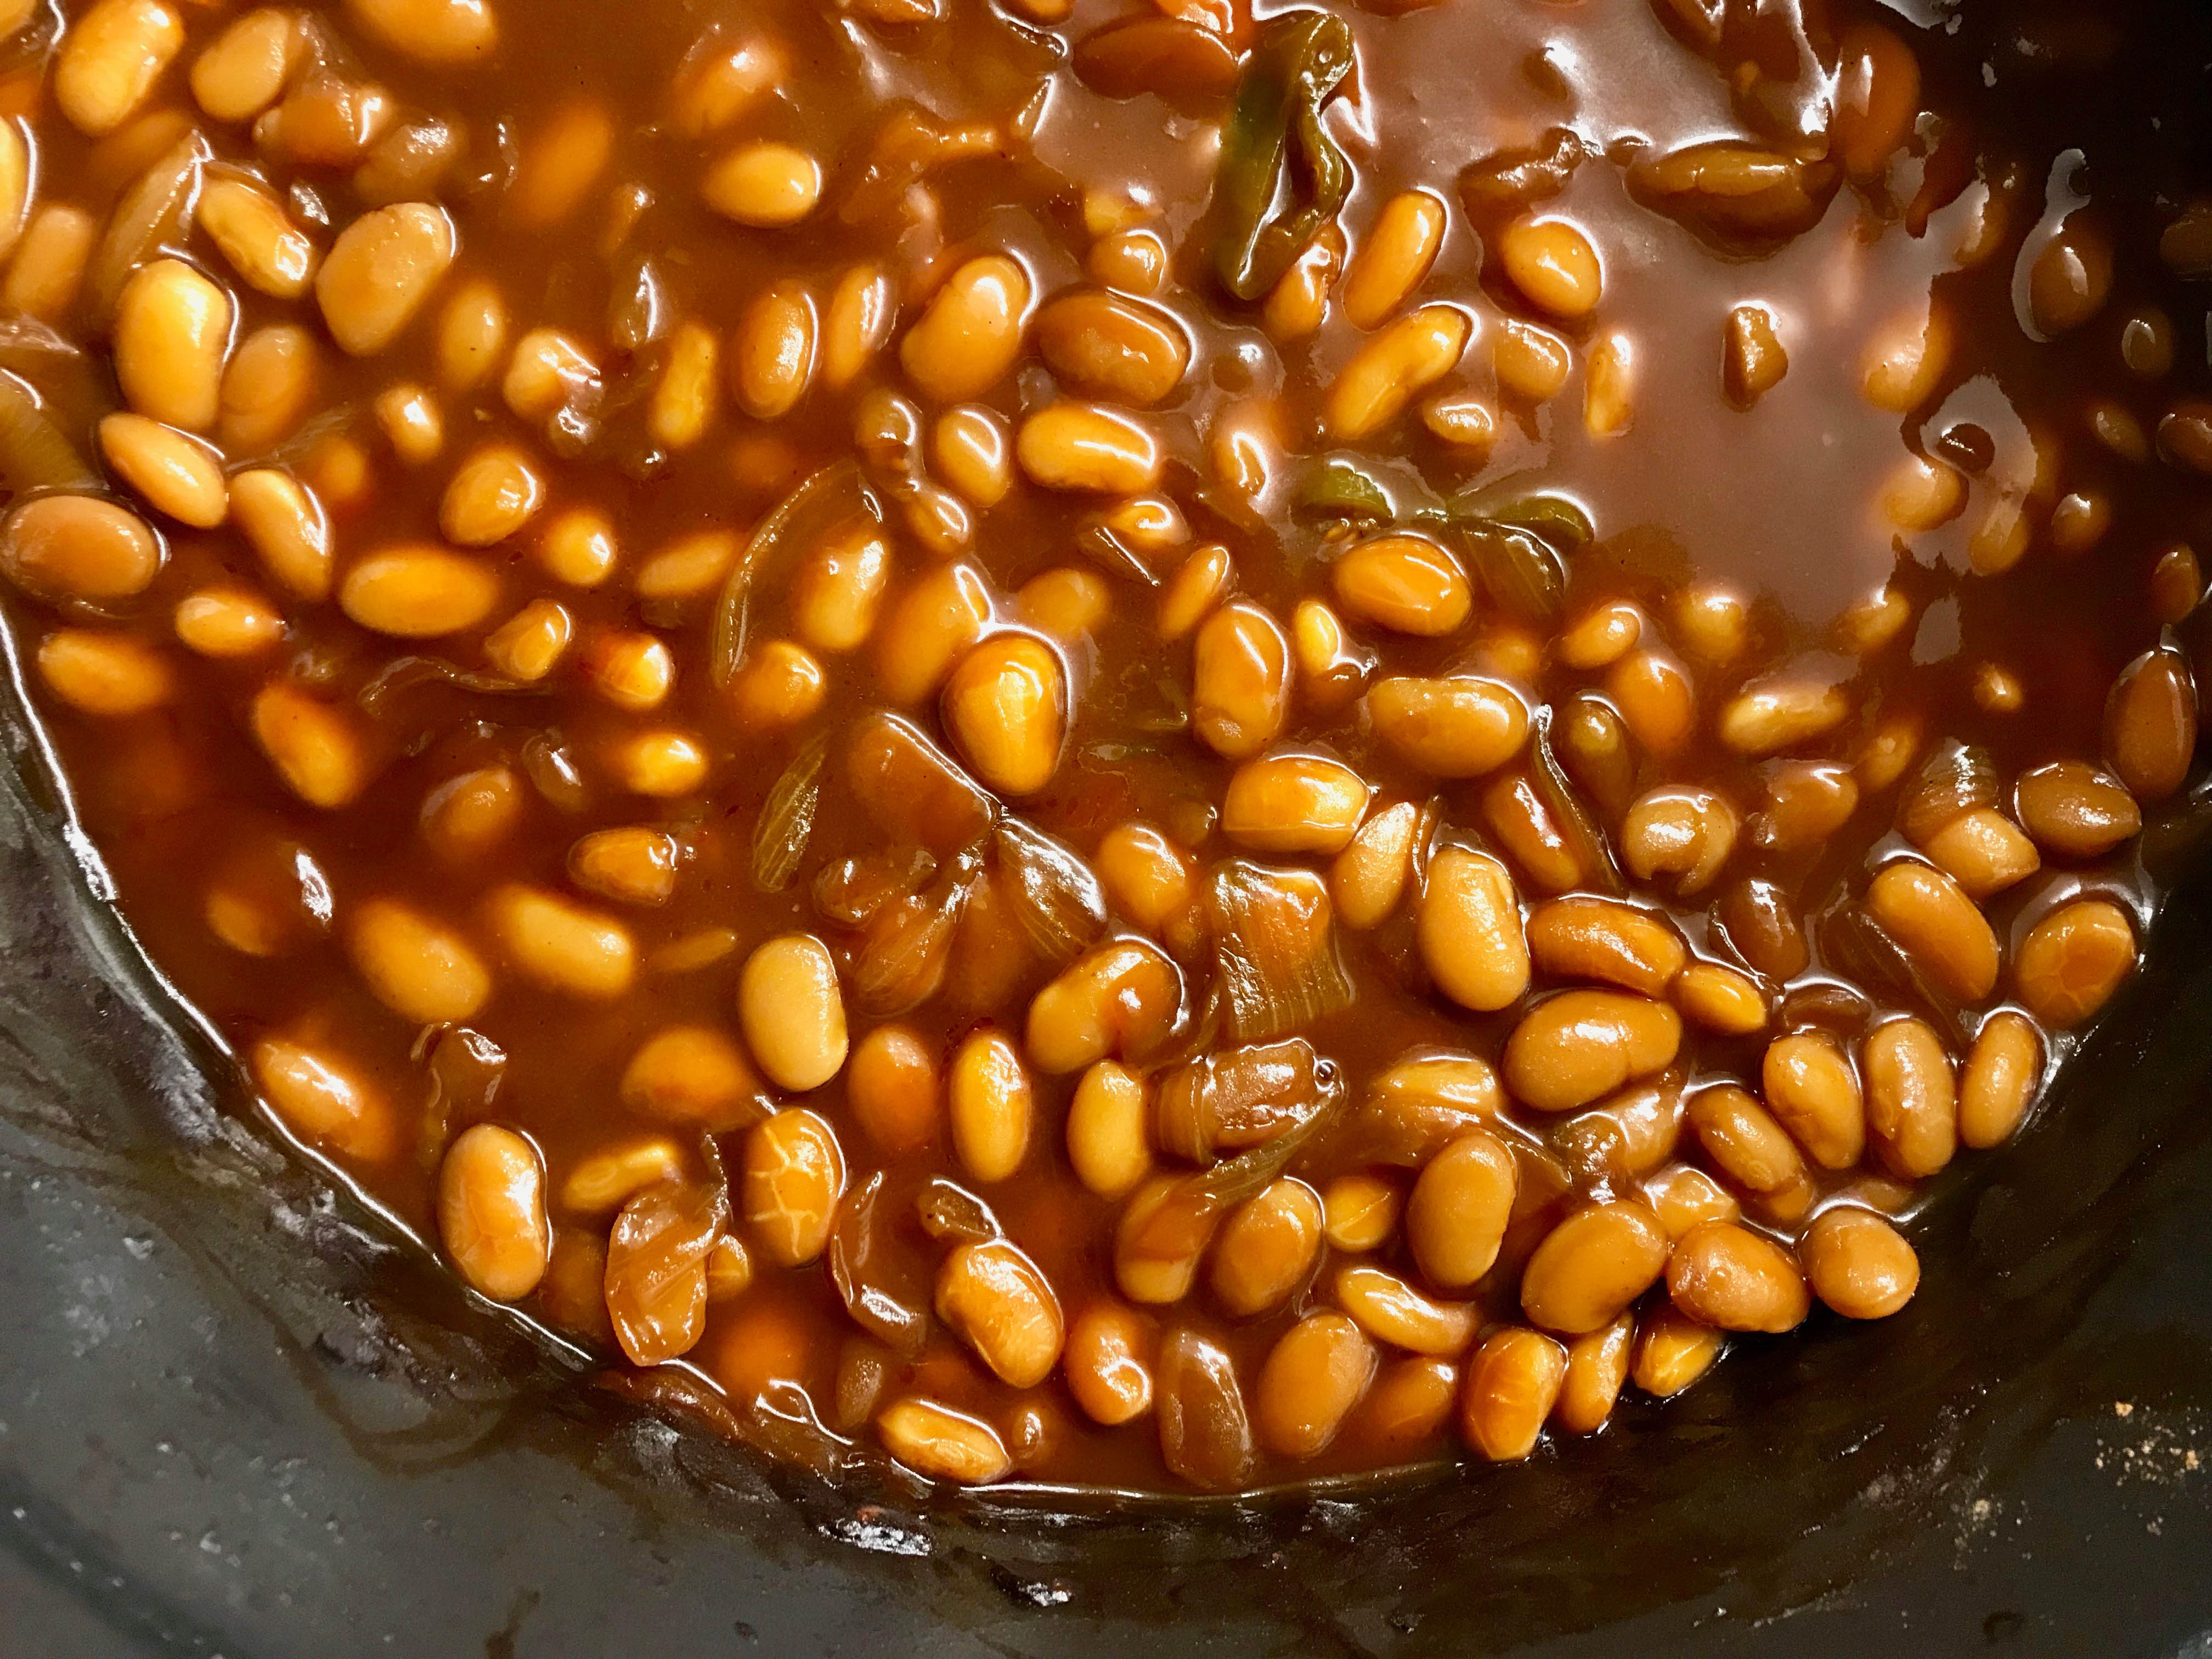 An image of the homemade BBQ Baked Beans recipe